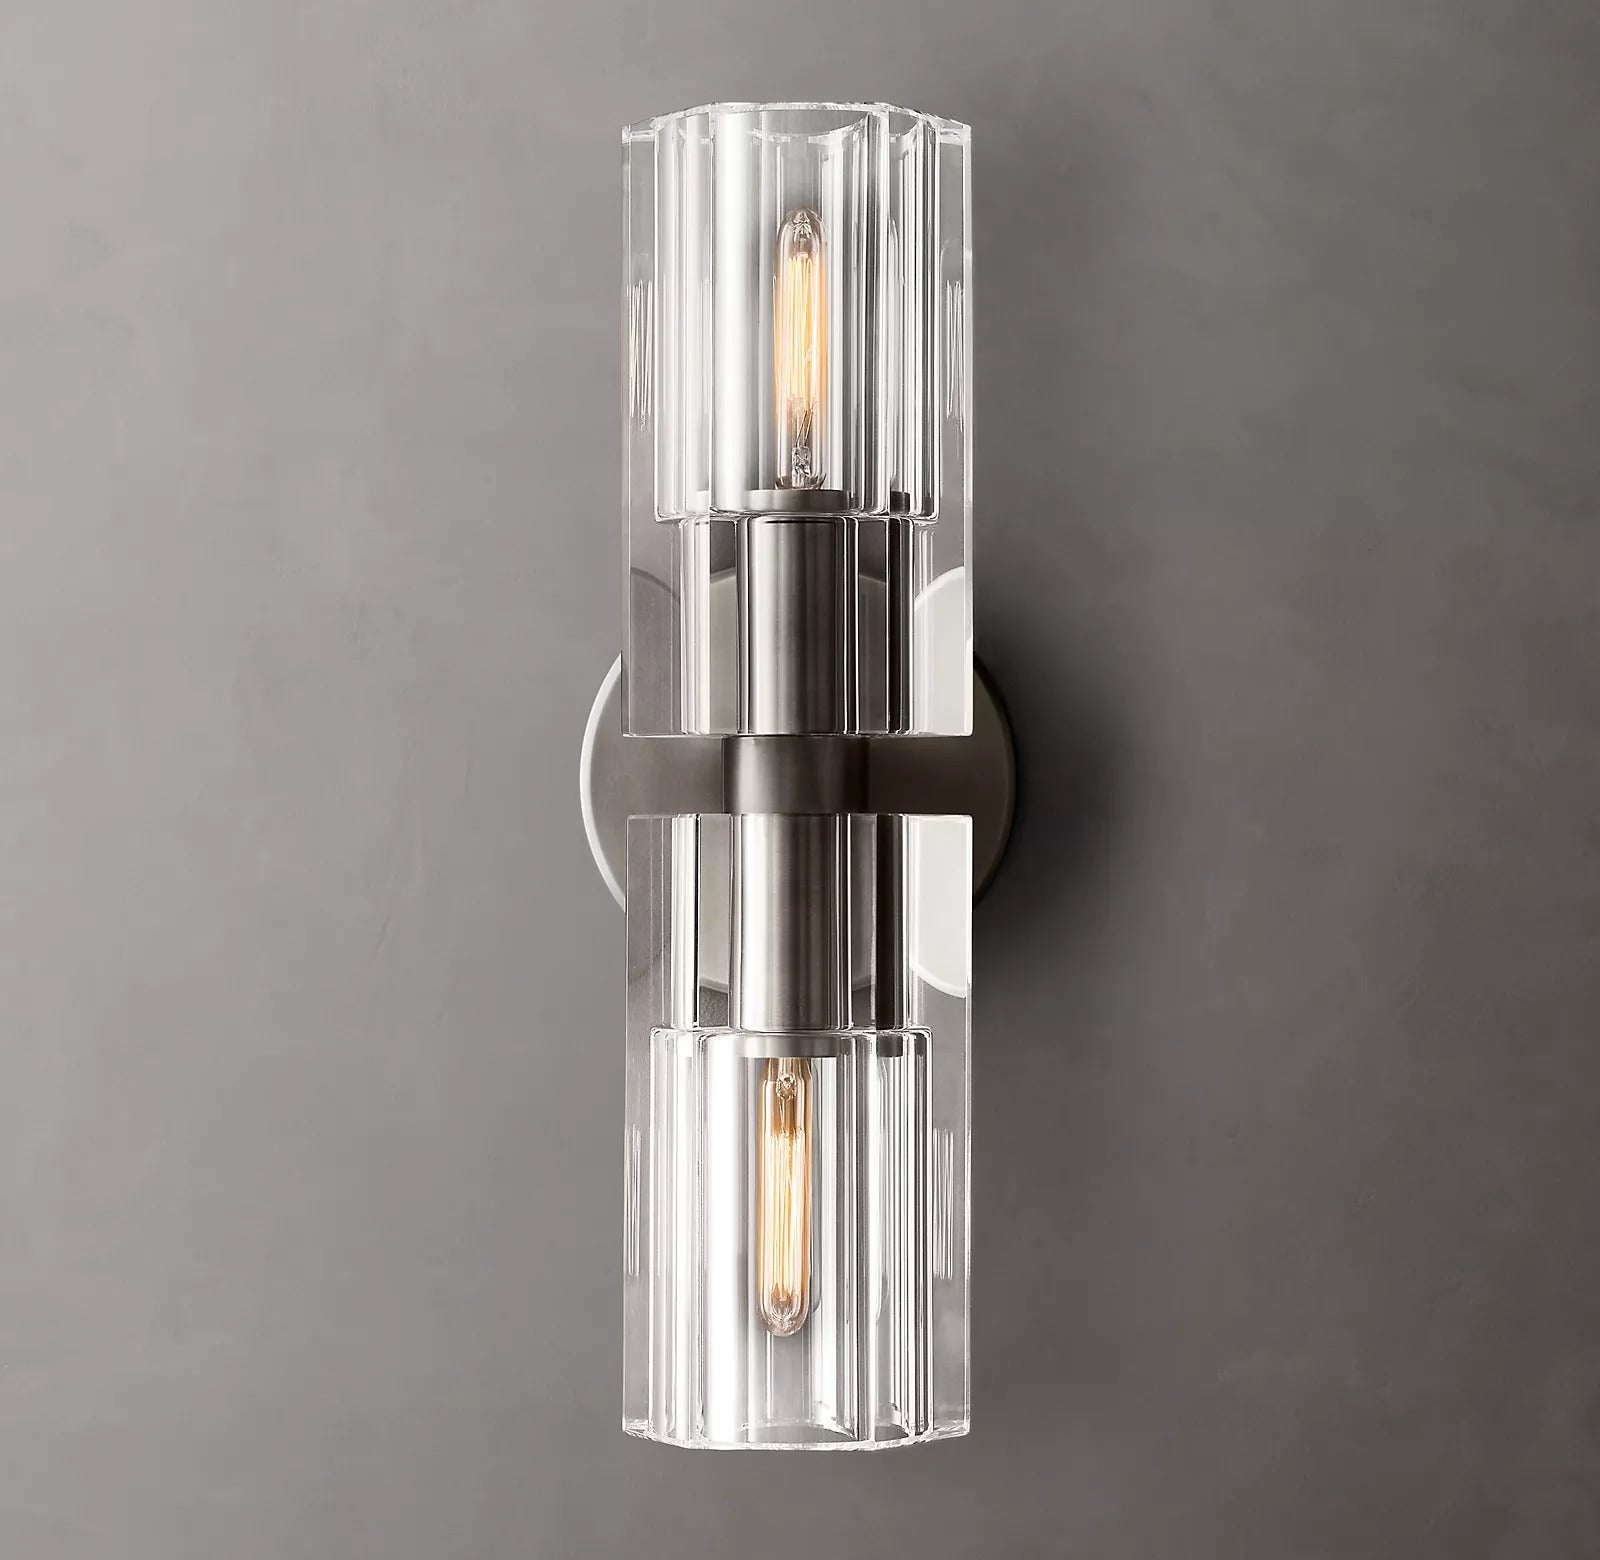 AKZONE Crystal Linear Wall Sconce 13"H